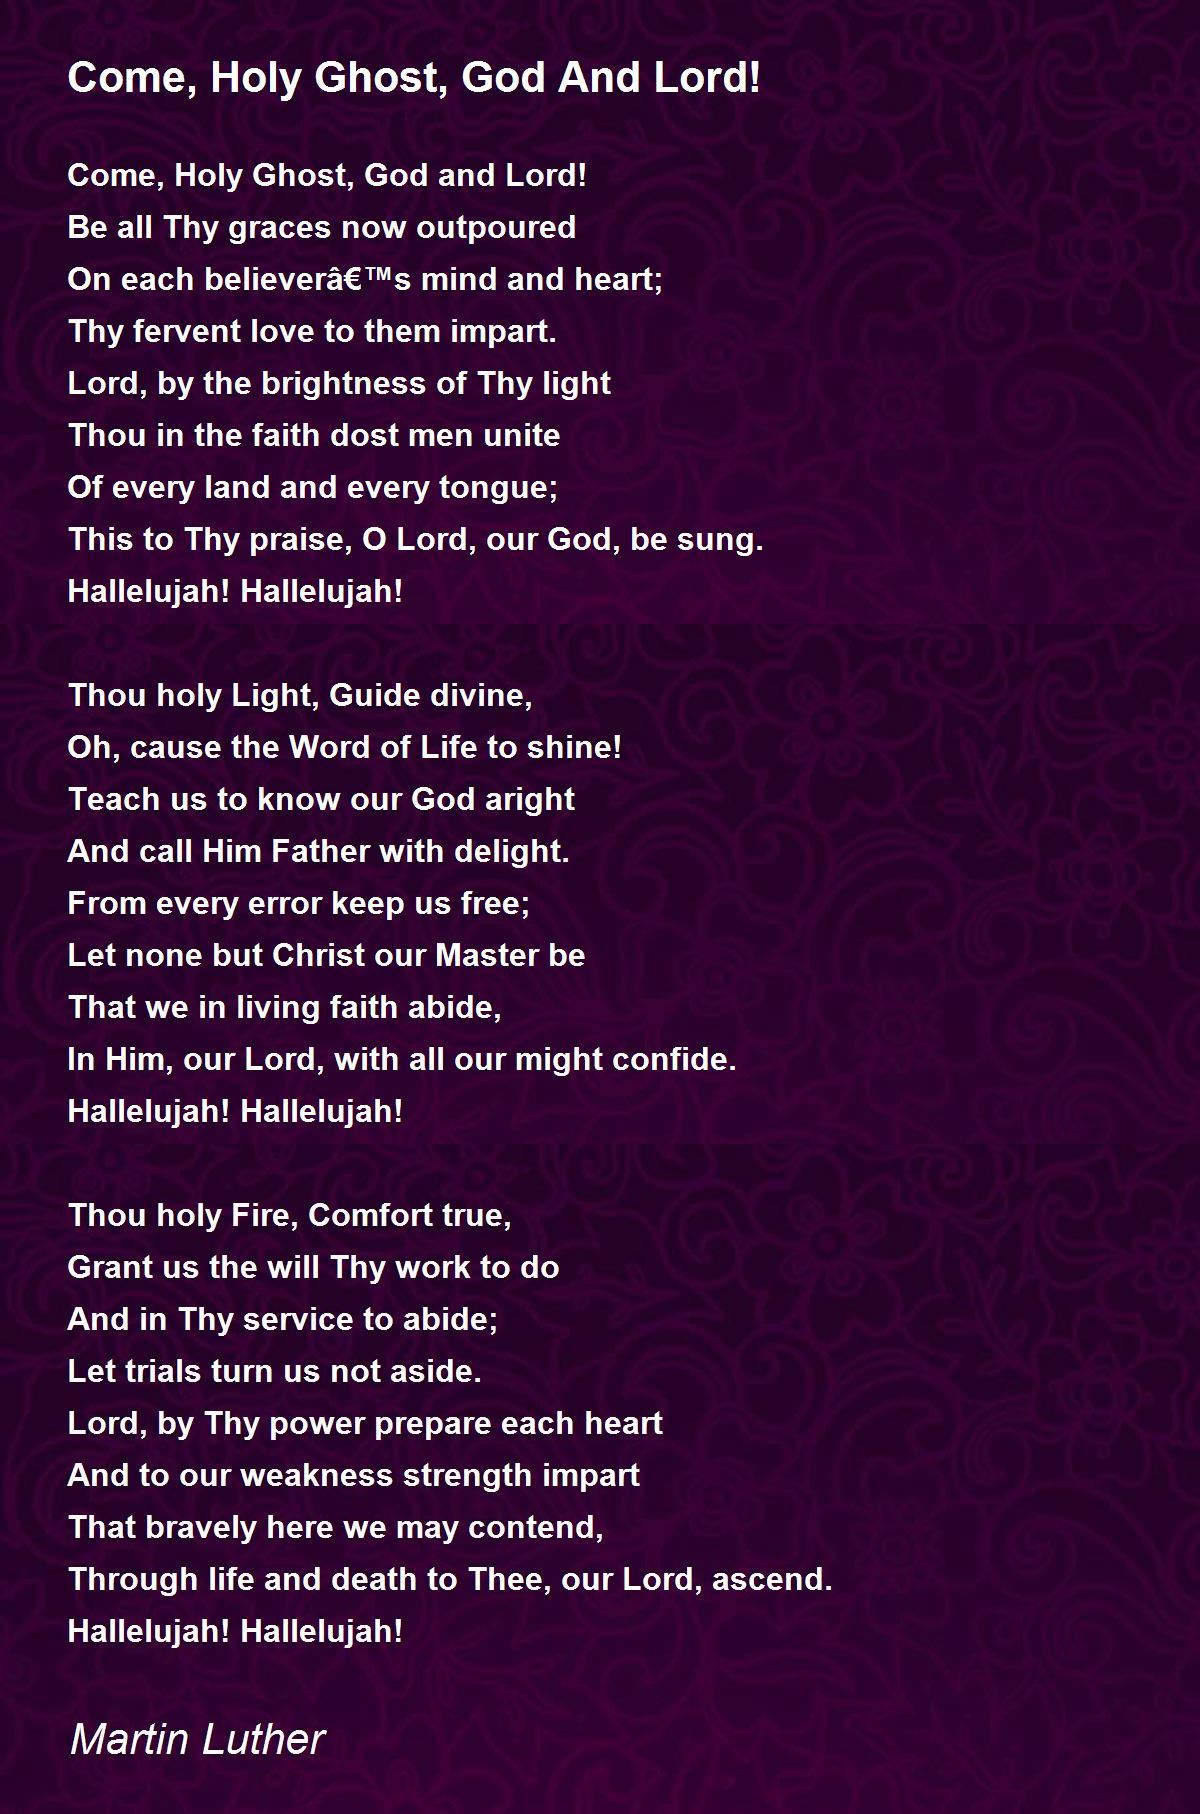 come holy ghost god and lord lyrics